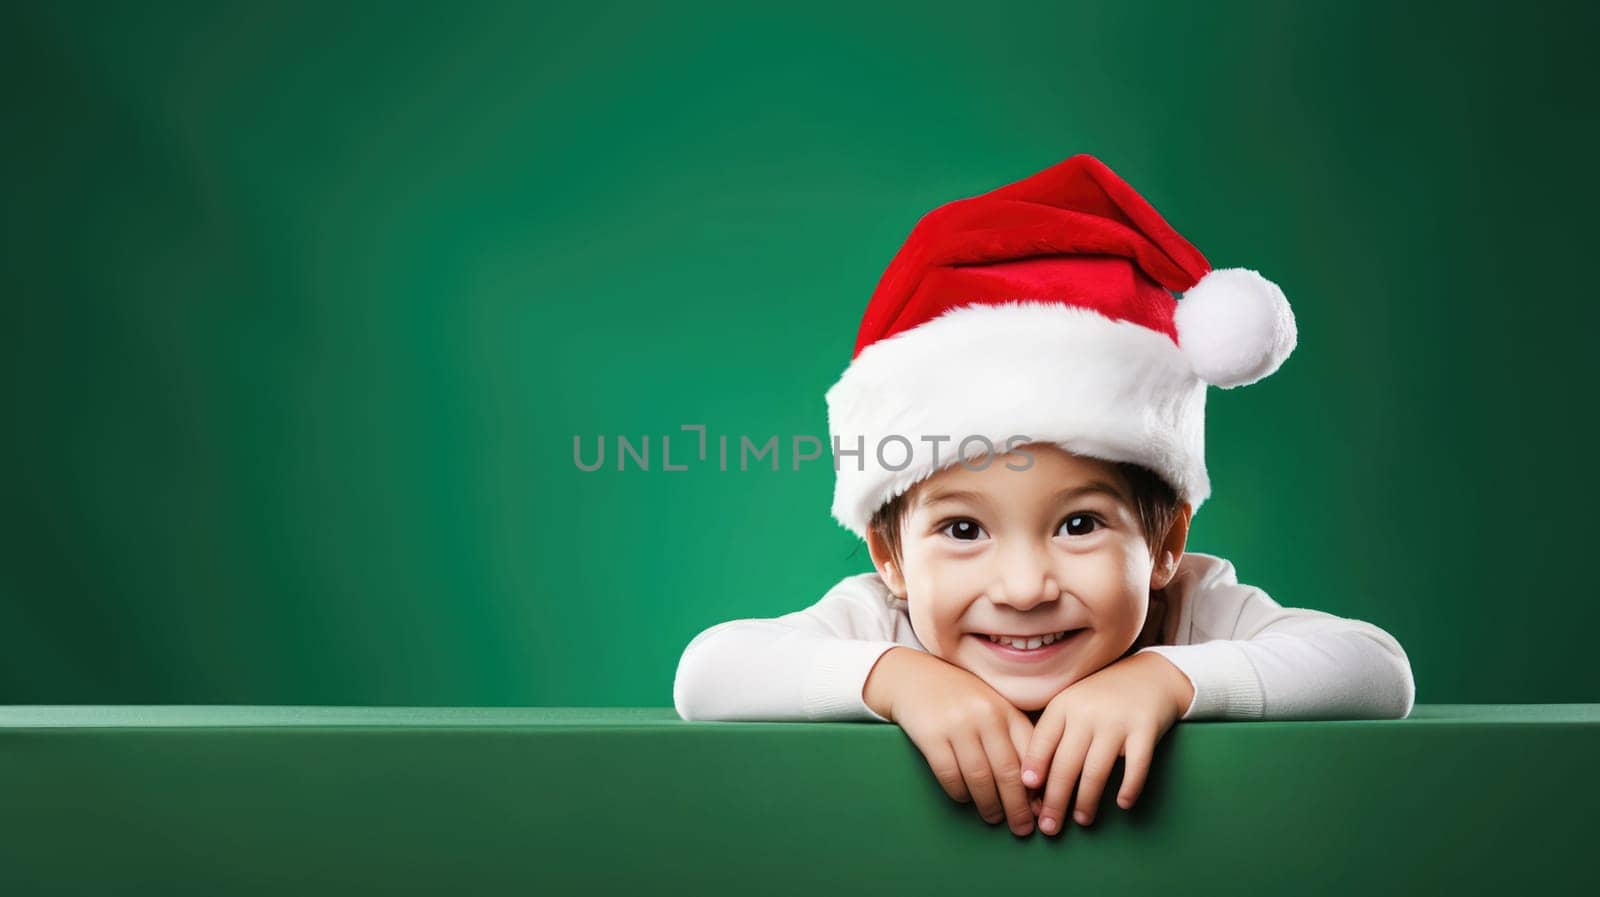 Surprised child in Santa hat hiding behind green advertisement board, Copy space for text or design, kid peeking out blank banner. by JuliaDorian